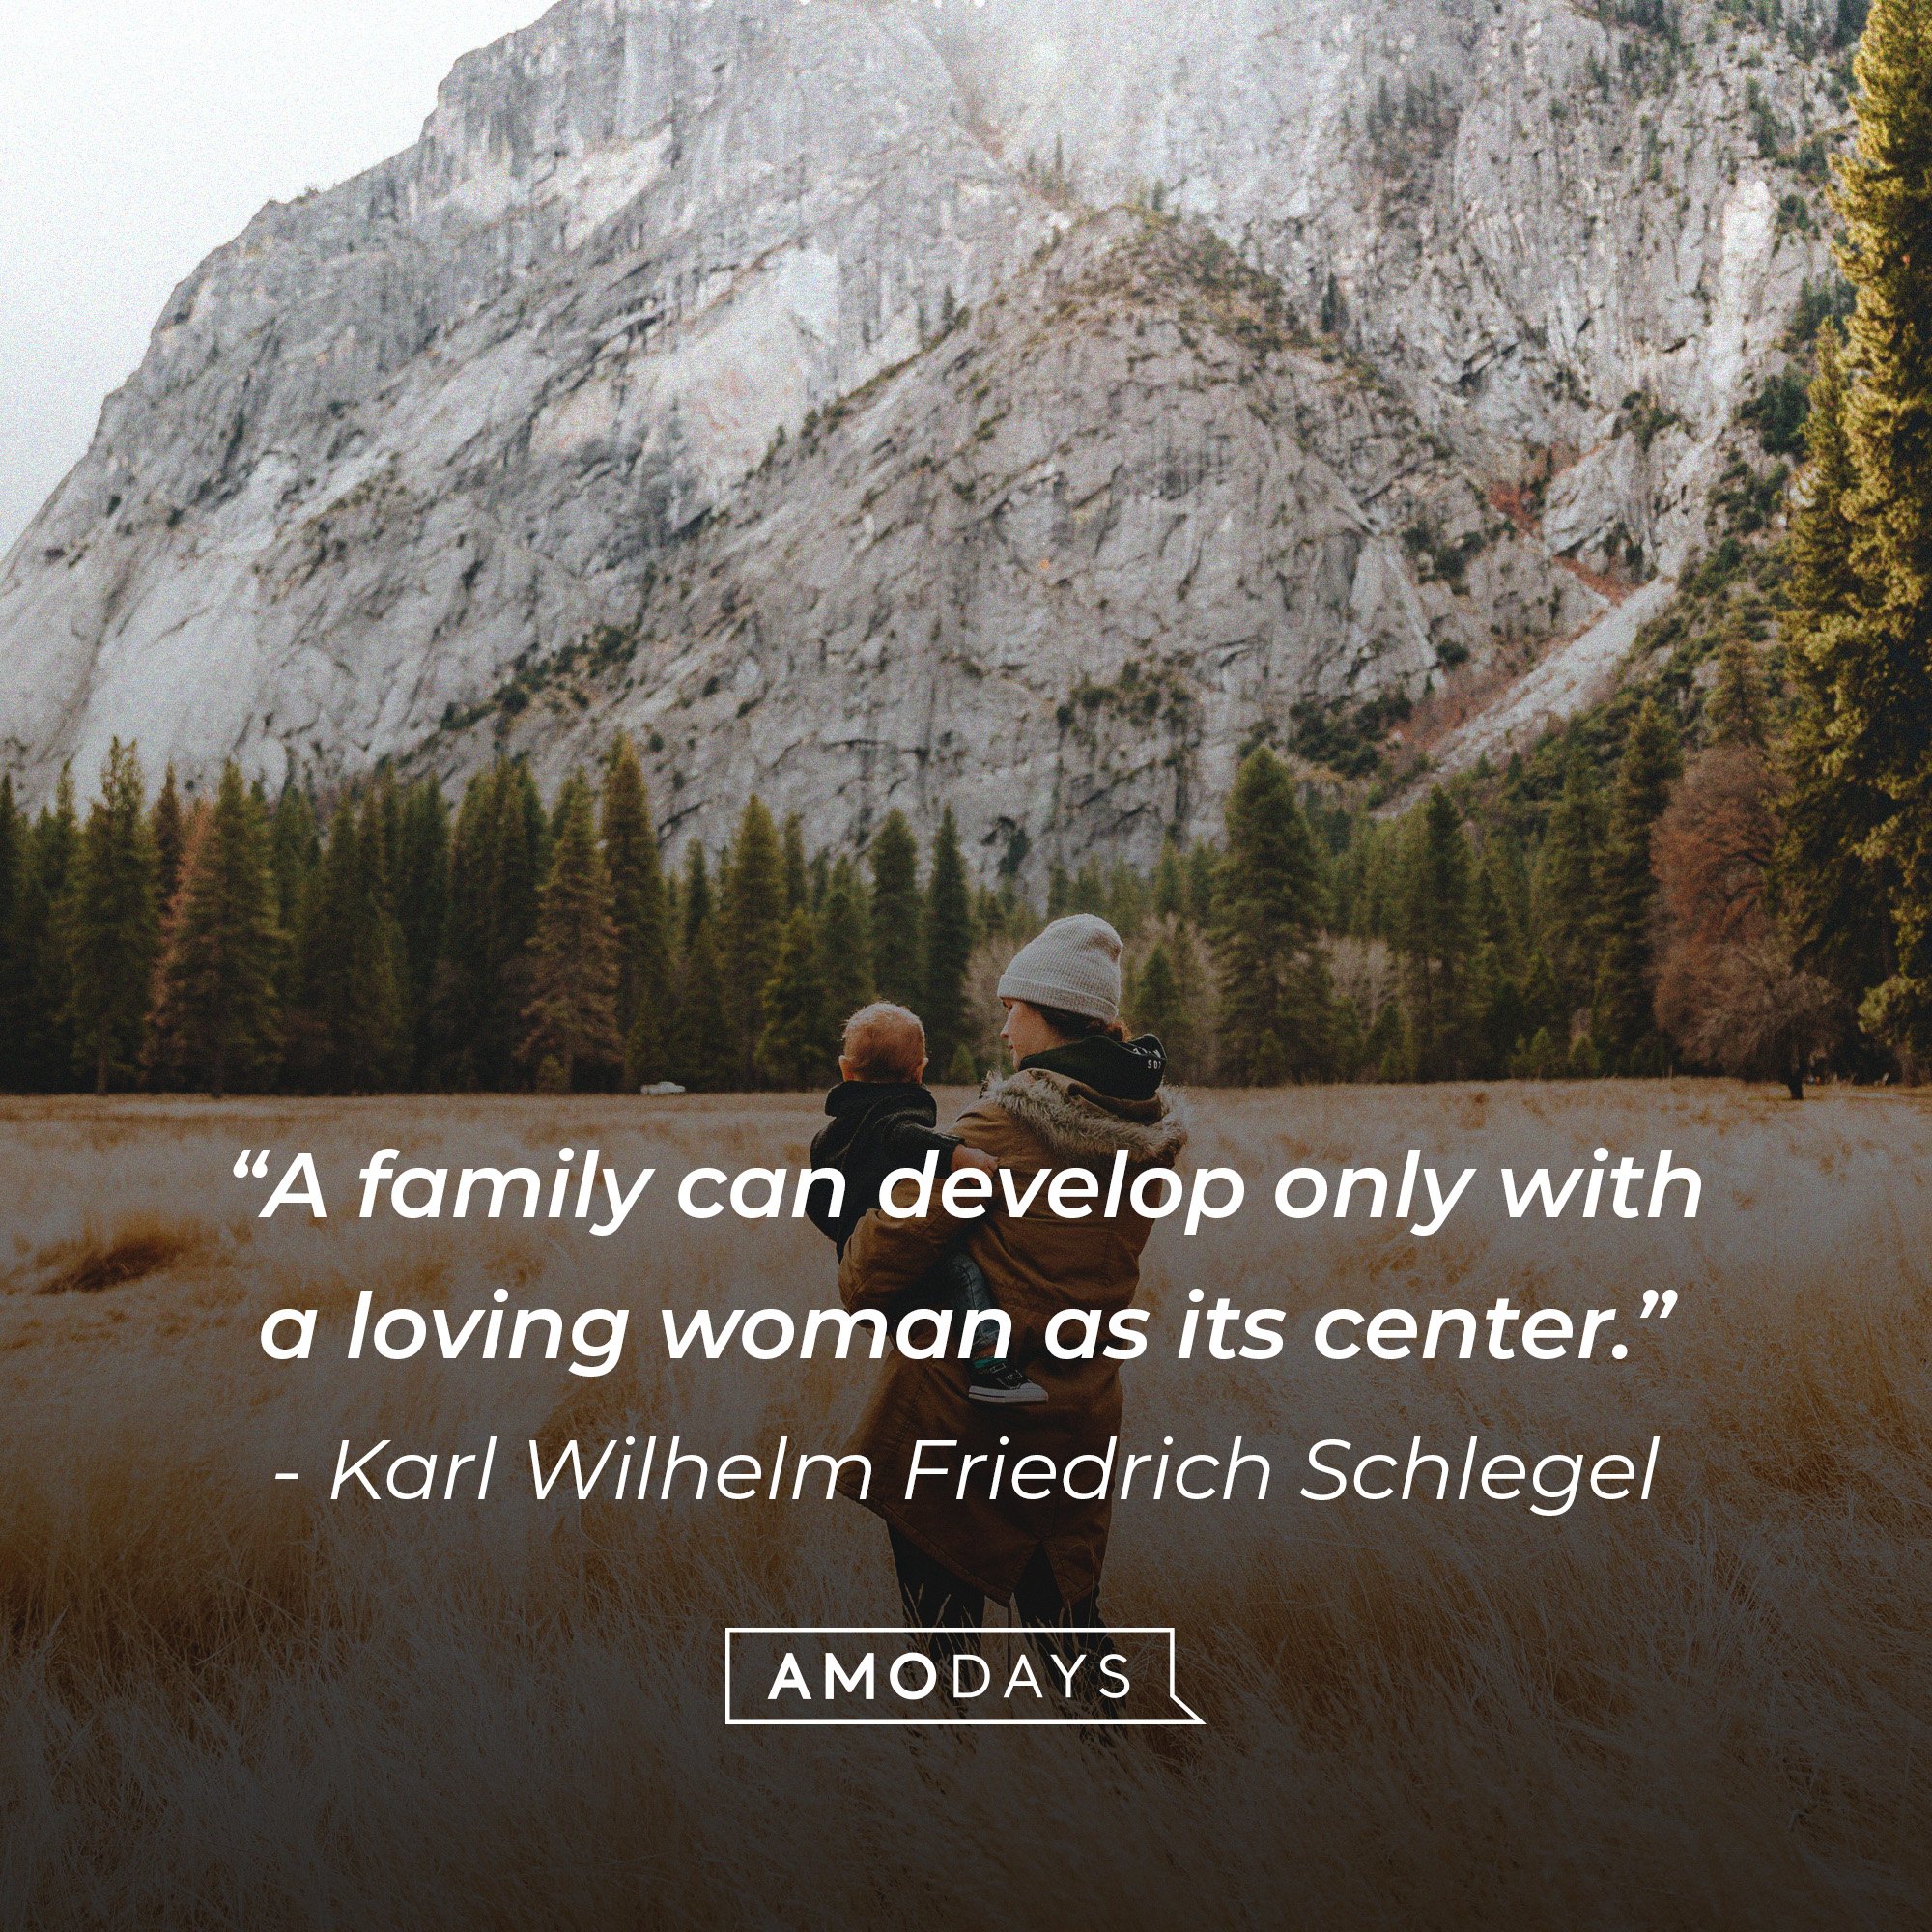 Karl Wilhelm Friedrich Schlegel's quote: “A family can develop only with a loving woman as its center.” | Image: AmoDays